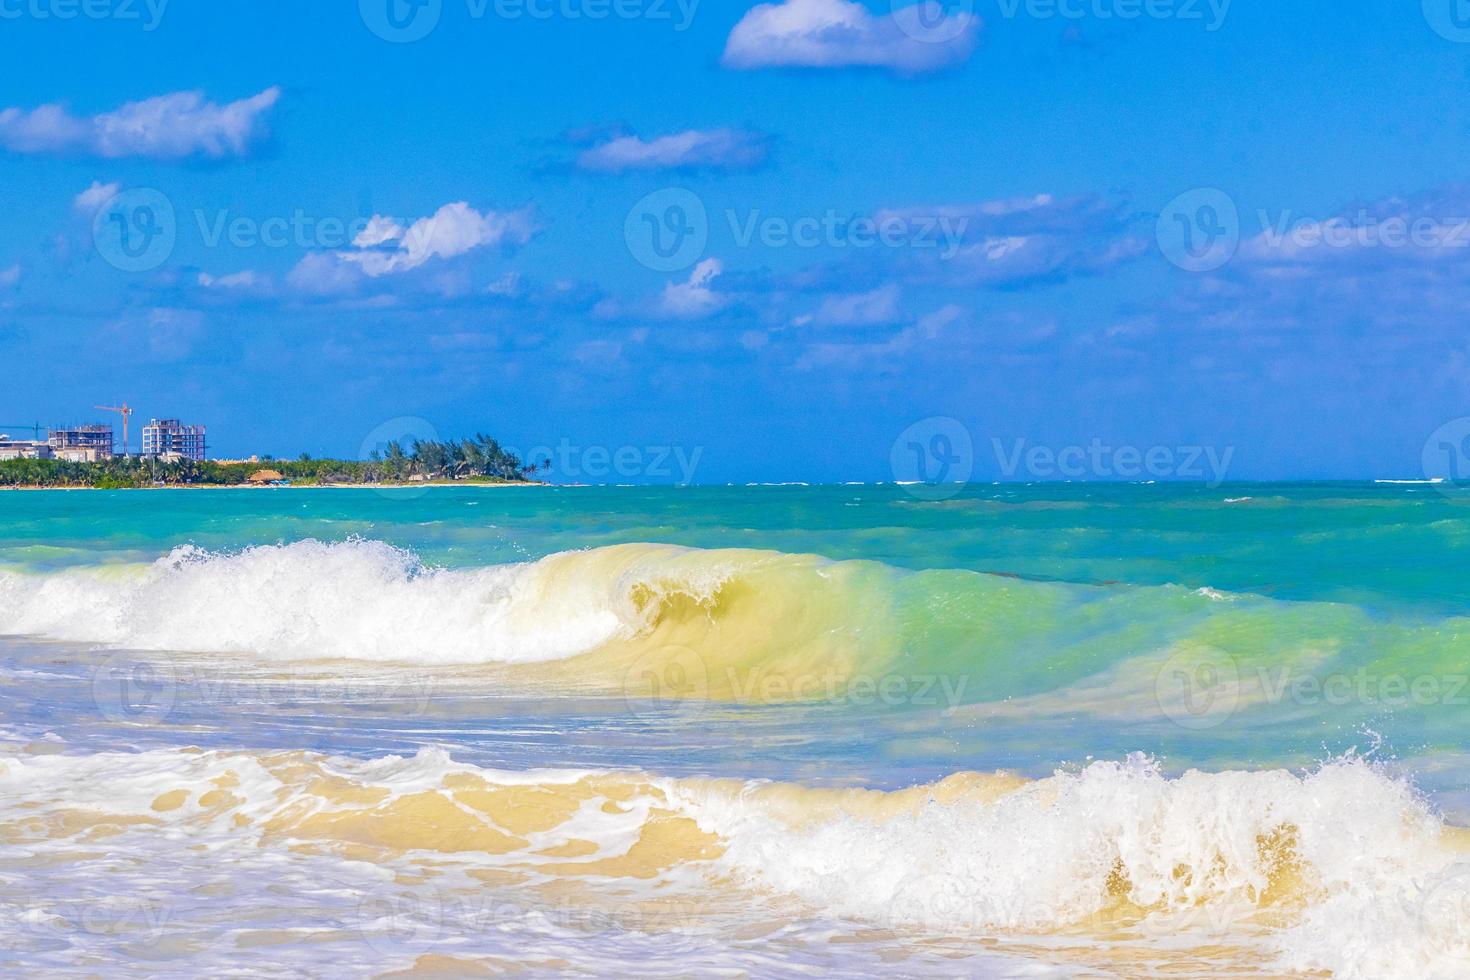 Tropical mexican beach waves turquoise water Playa del Carmen Mexico. photo